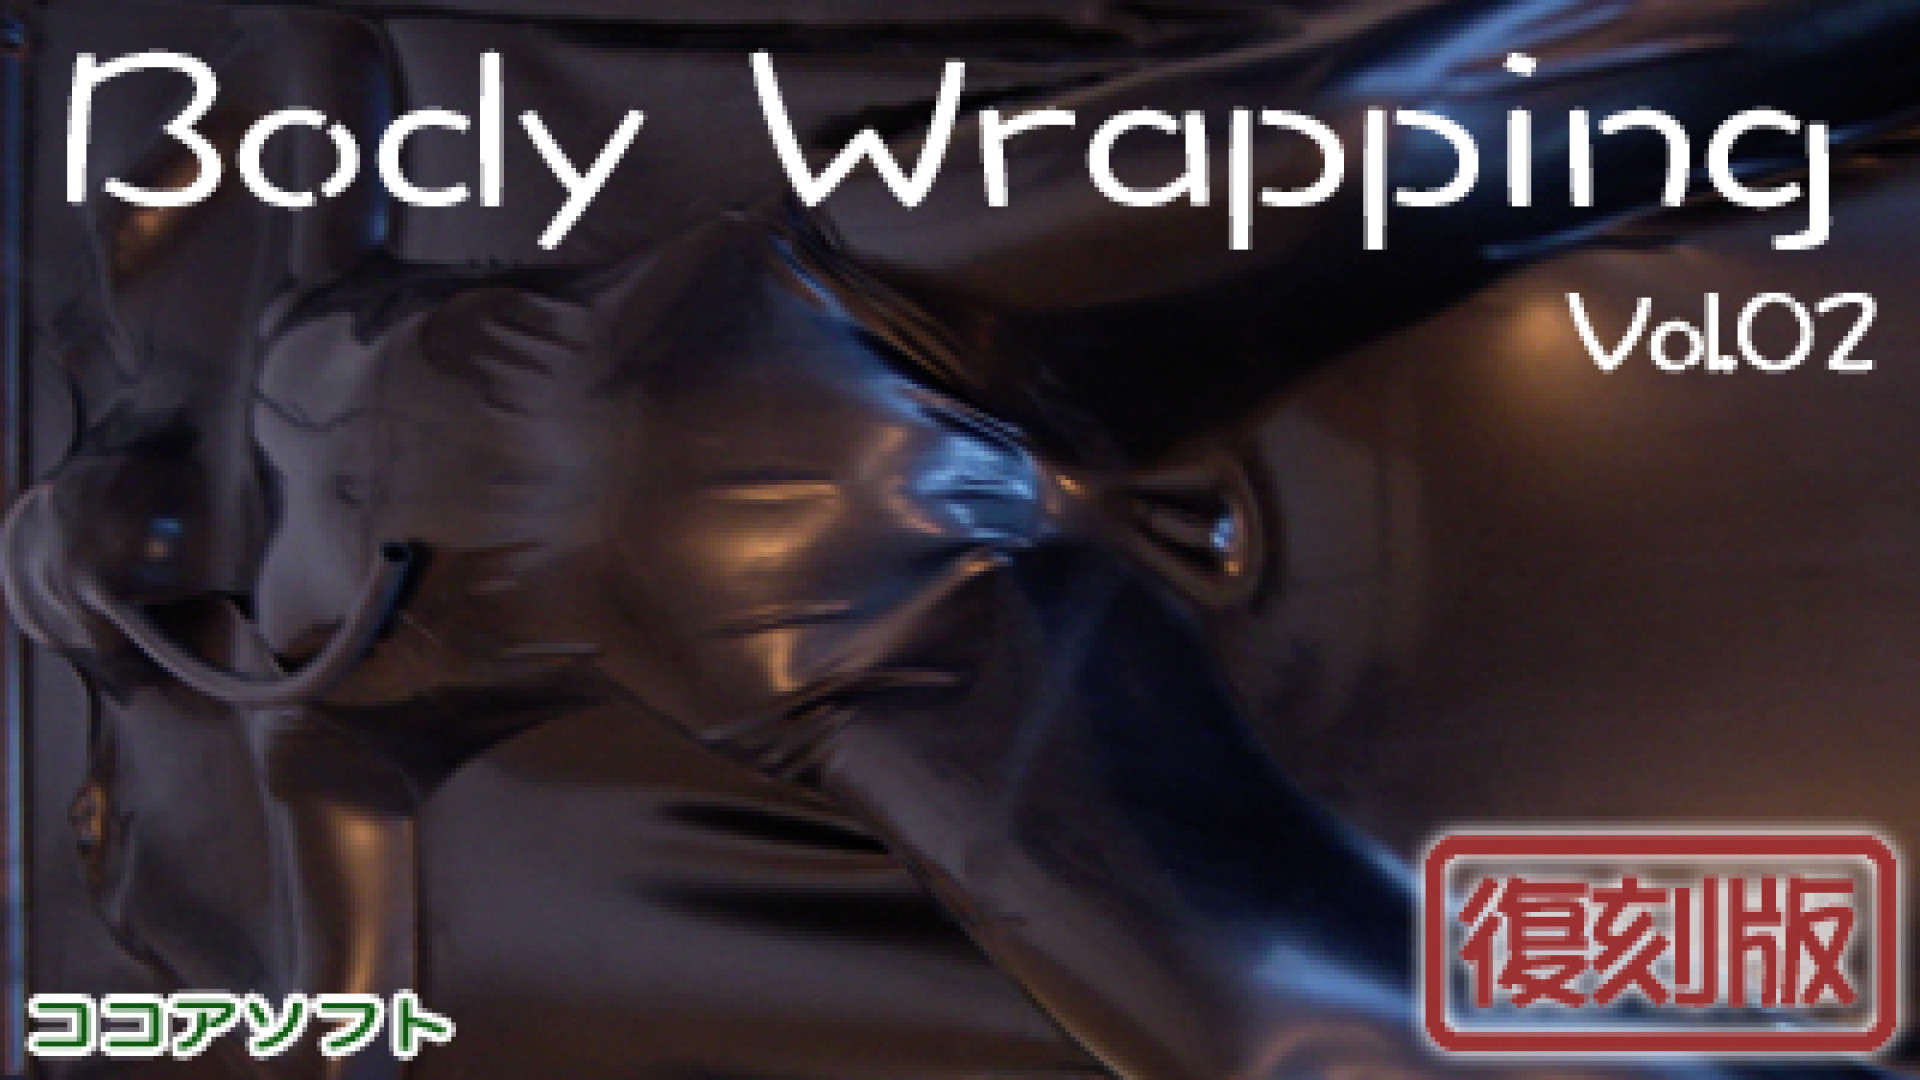 Body Wrapping Vol.02